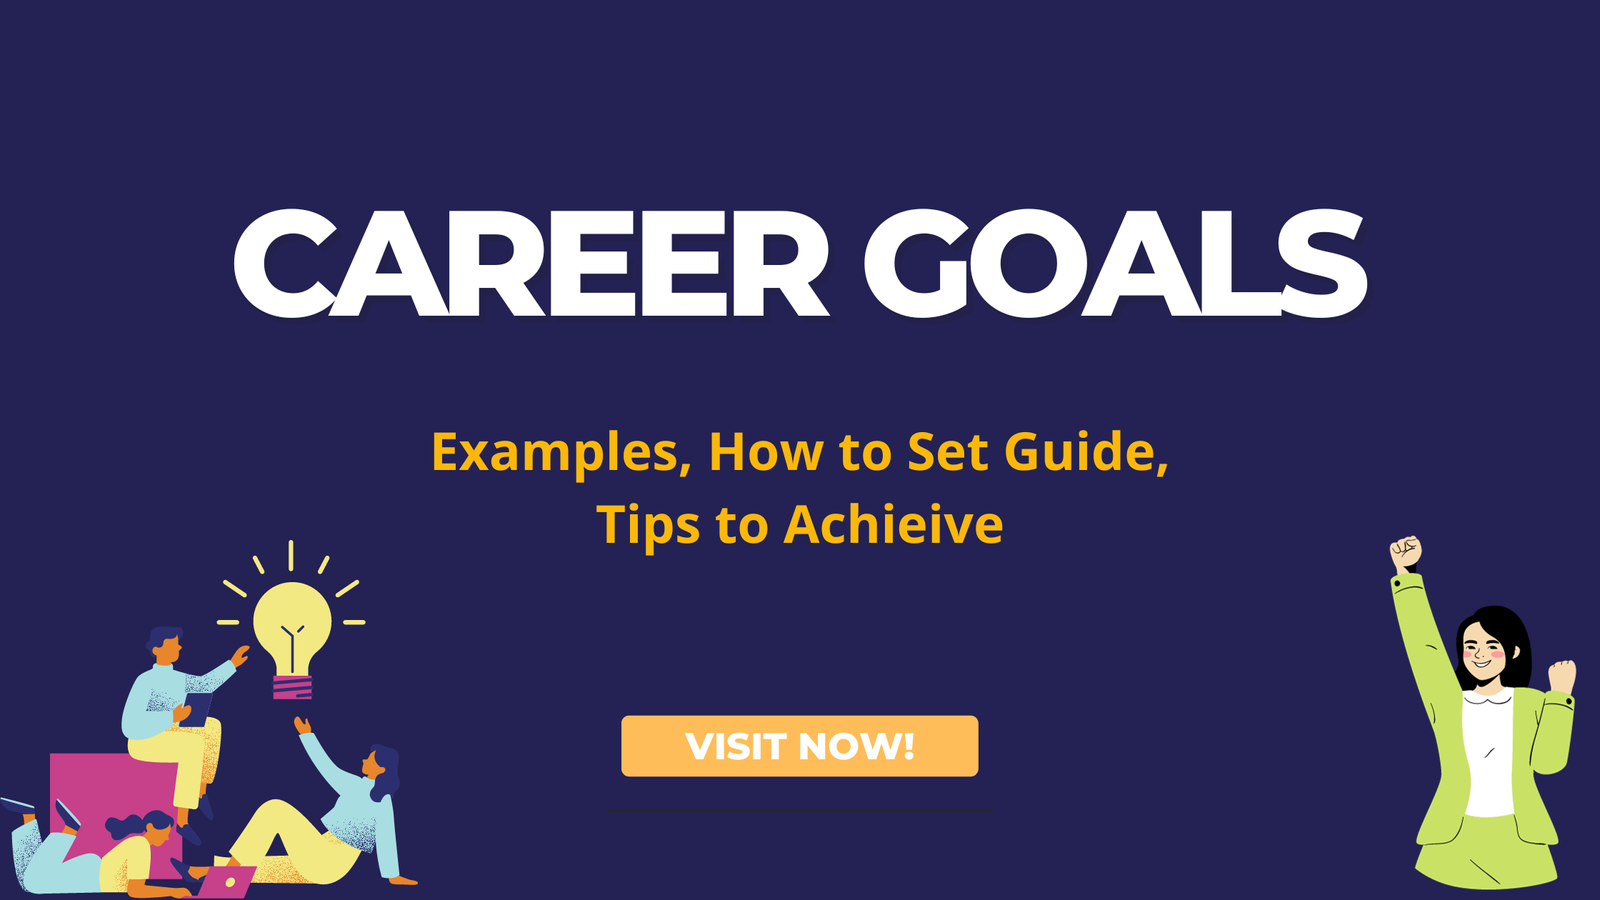 50+ Career Goals Examples, How to Set, Tips to Achieve Guide - eBestCourses